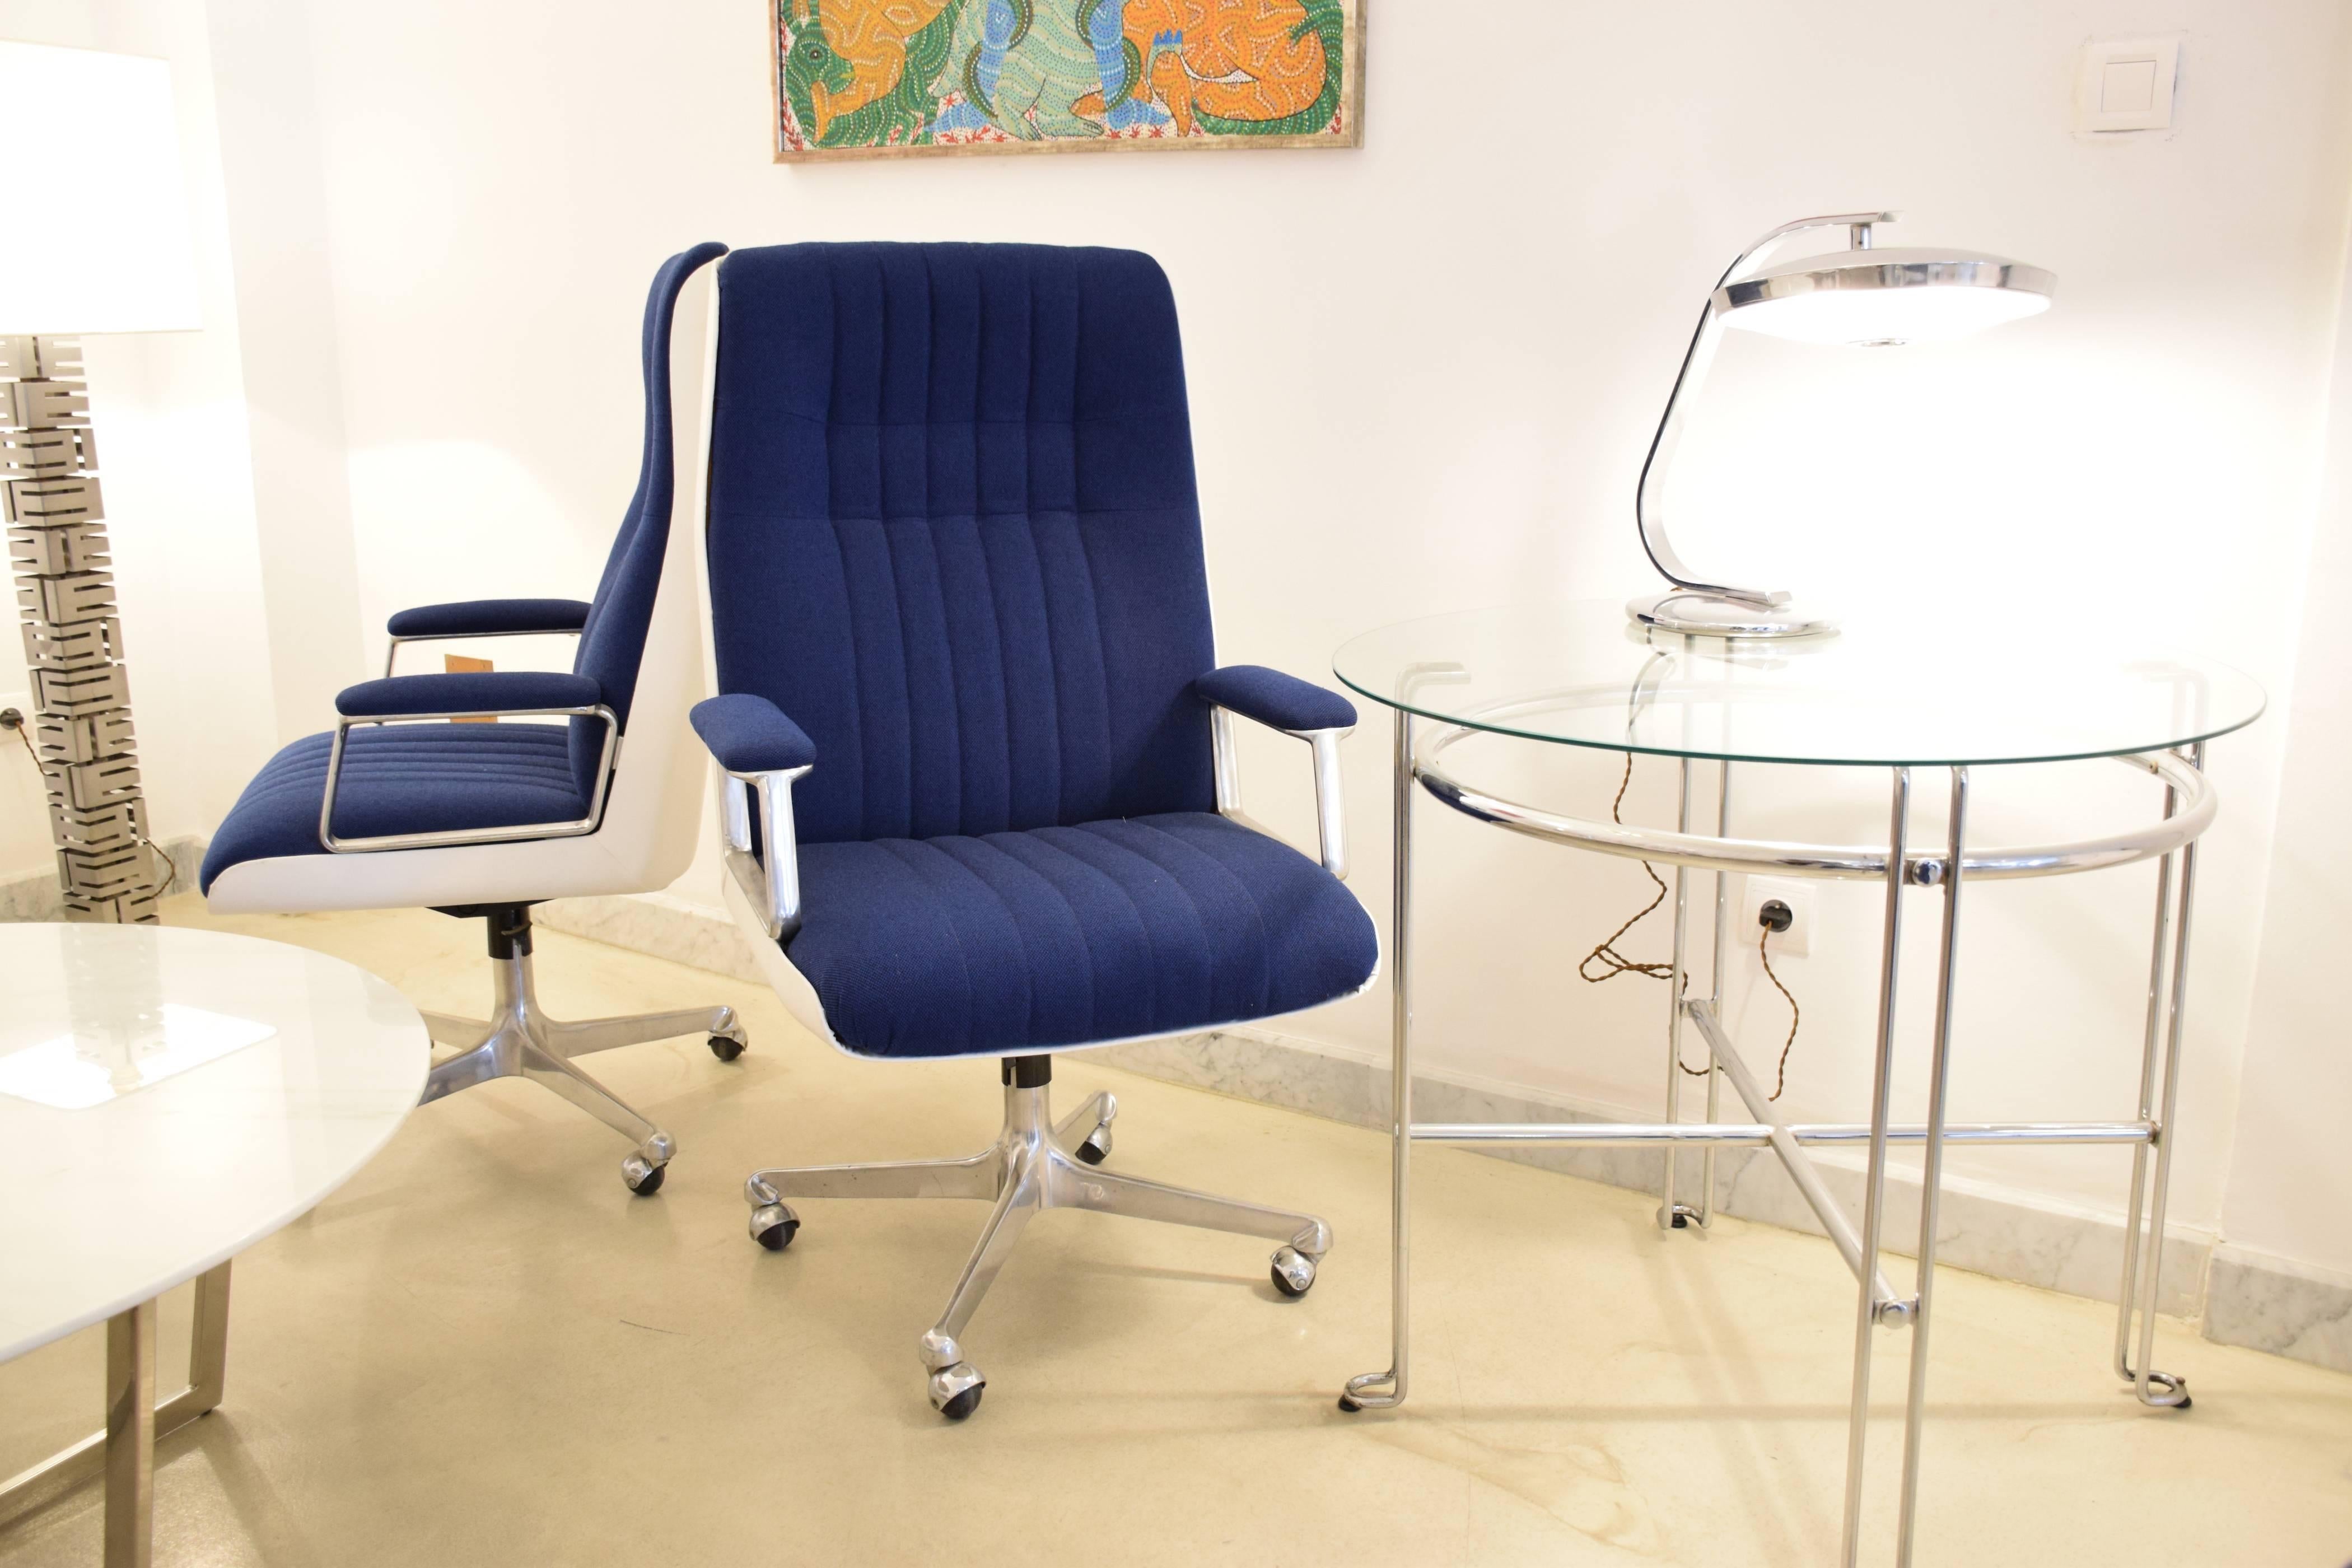 Vibrant Osvaldo Borsani adjustable swivel office desk chairs manufactured by Tecno in the 1960s. Restored with a Lelièvre Paris wool type and carefully re-polished aluminum base. 
